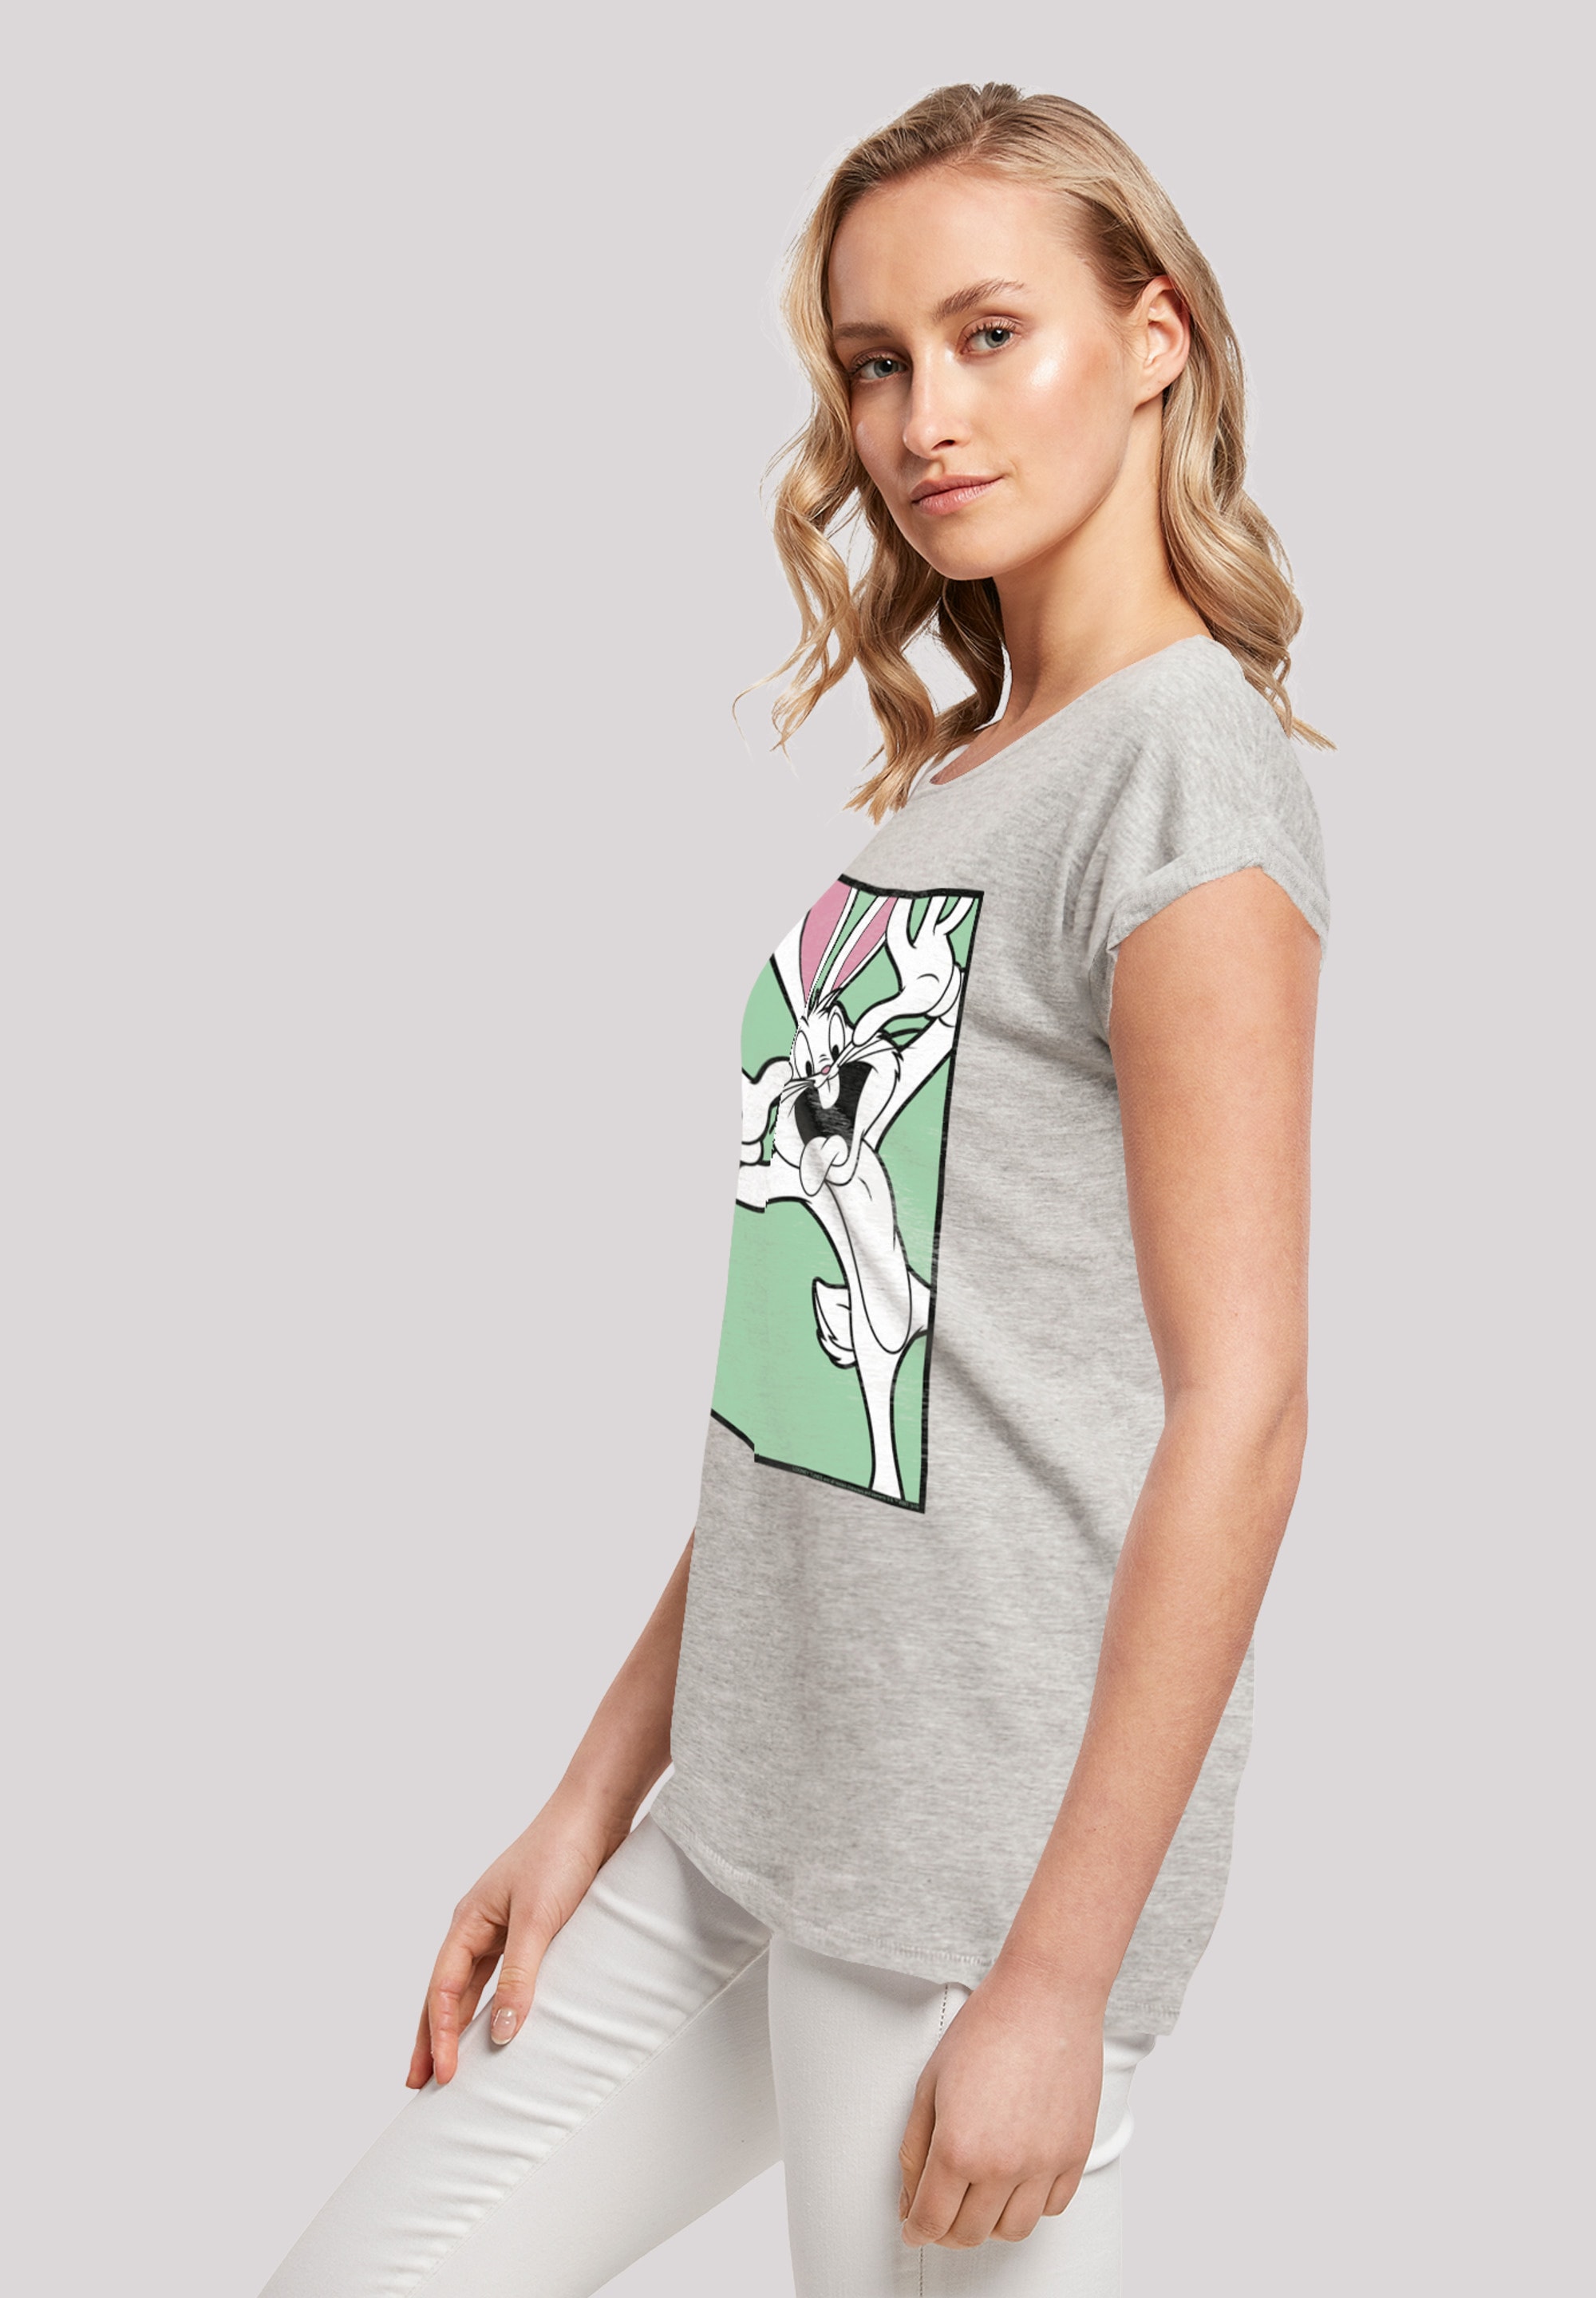 F4NT4STIC T-Shirt »Looney Tunes Bugs Bunny Funny Face«, Print